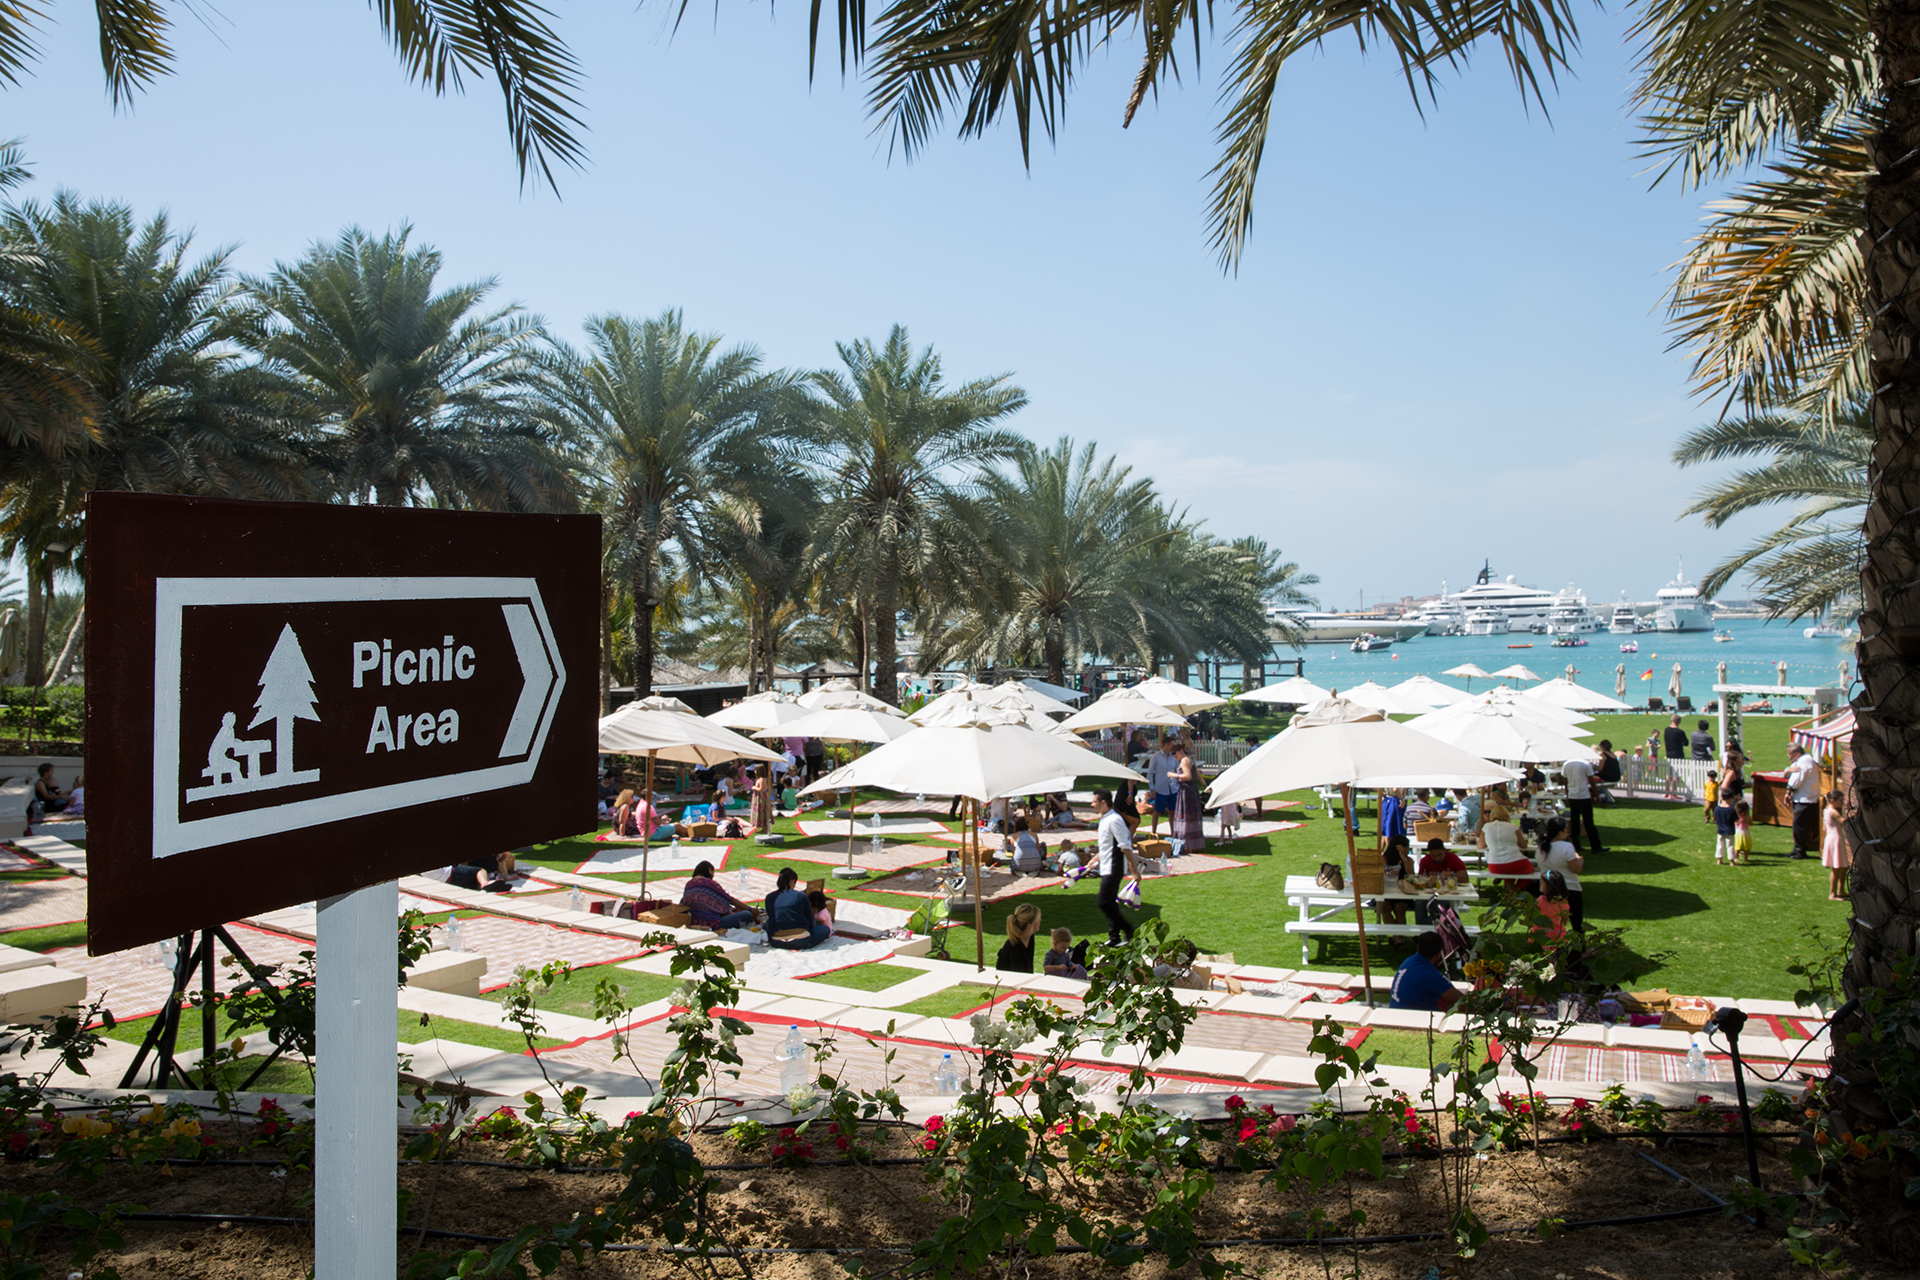 Dubai’s best picnic areas 2020 | Things To Do | Time Out Dubai